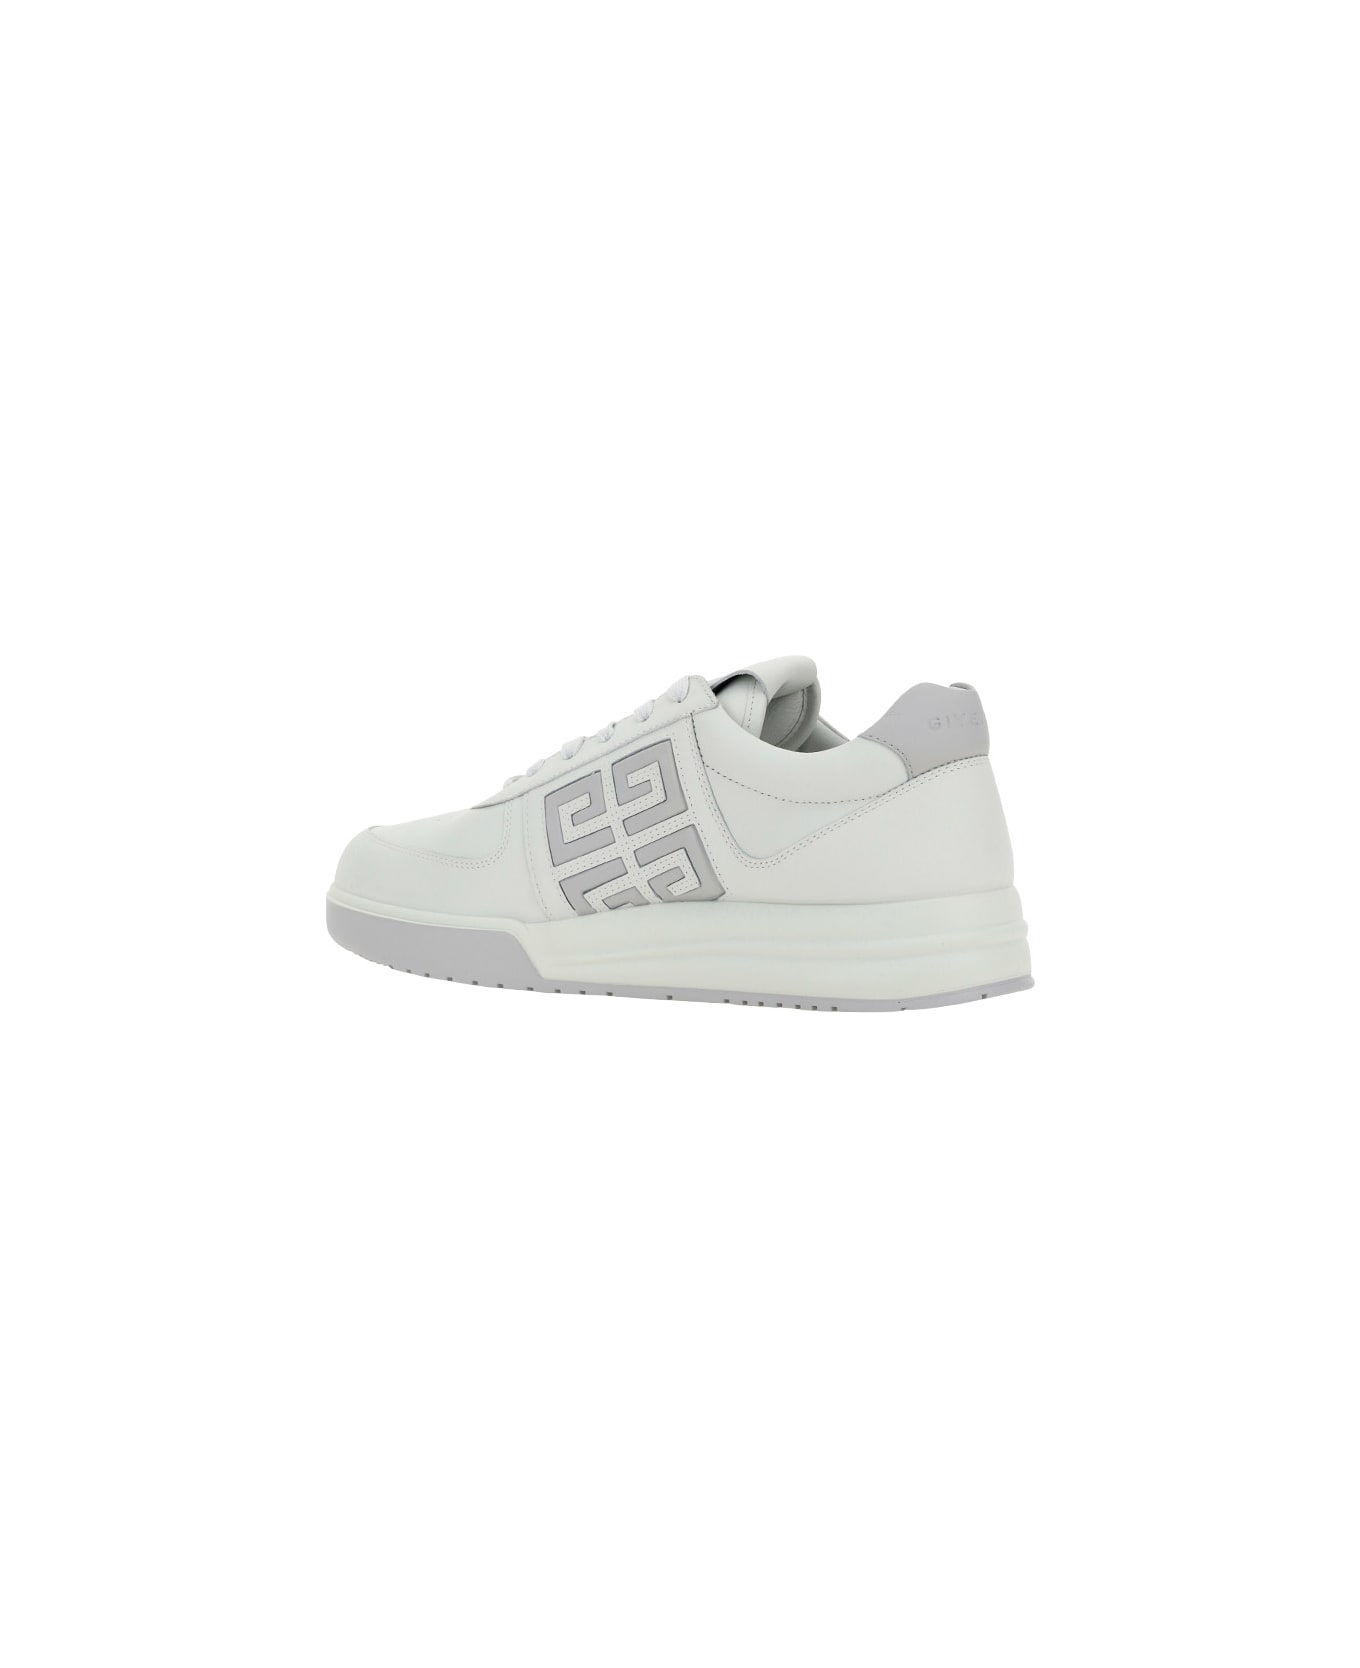 Givenchy 'g4' Sneakers - White/grey